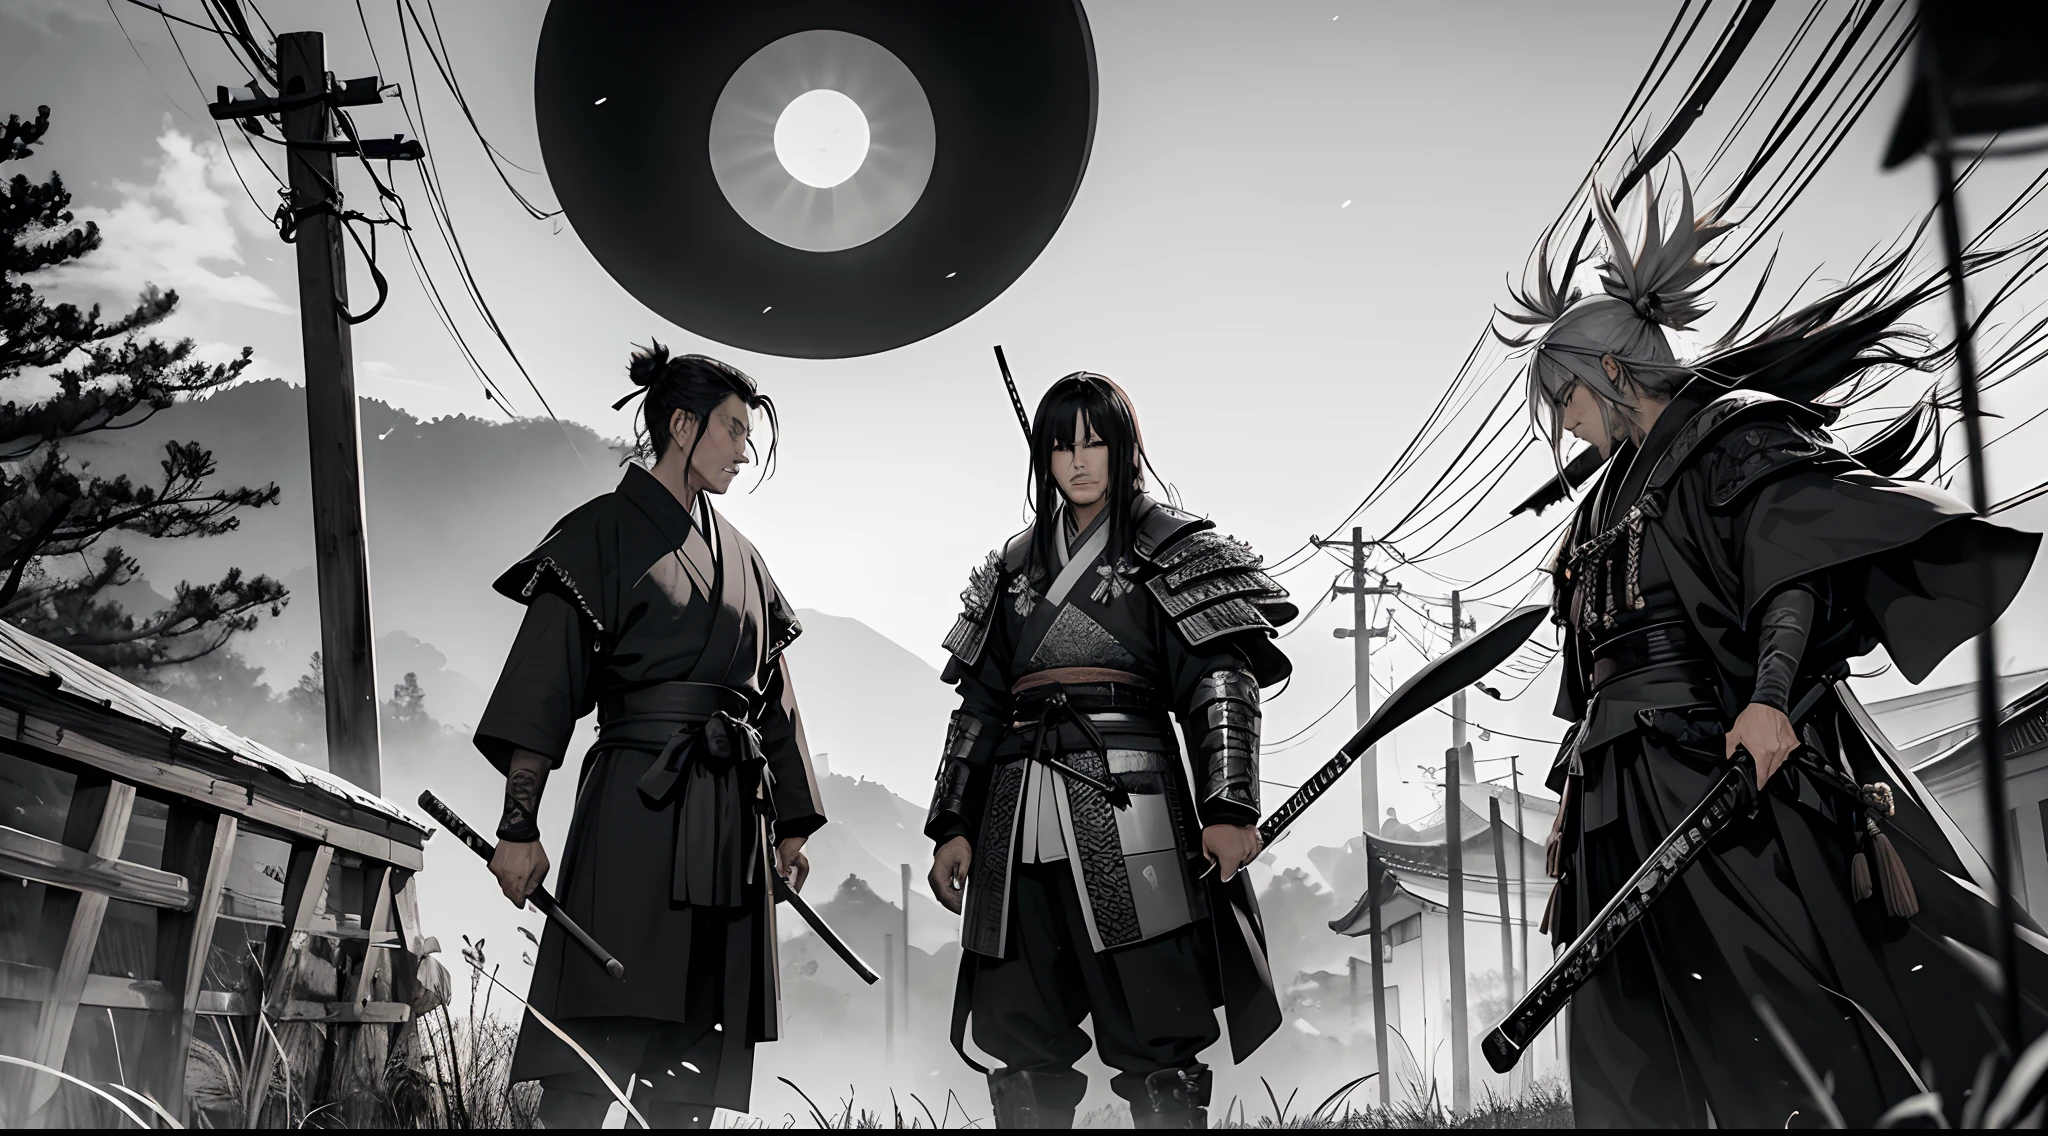 1 Samurai, Ronin, With swords, poses With swords, Walking in a rice field, Night with rays, Akira Kurosawa style, highy detailed, high resolution, cinemactic, Various details in the scenario, Japanese feudal era, Japanese Empire, black and white image